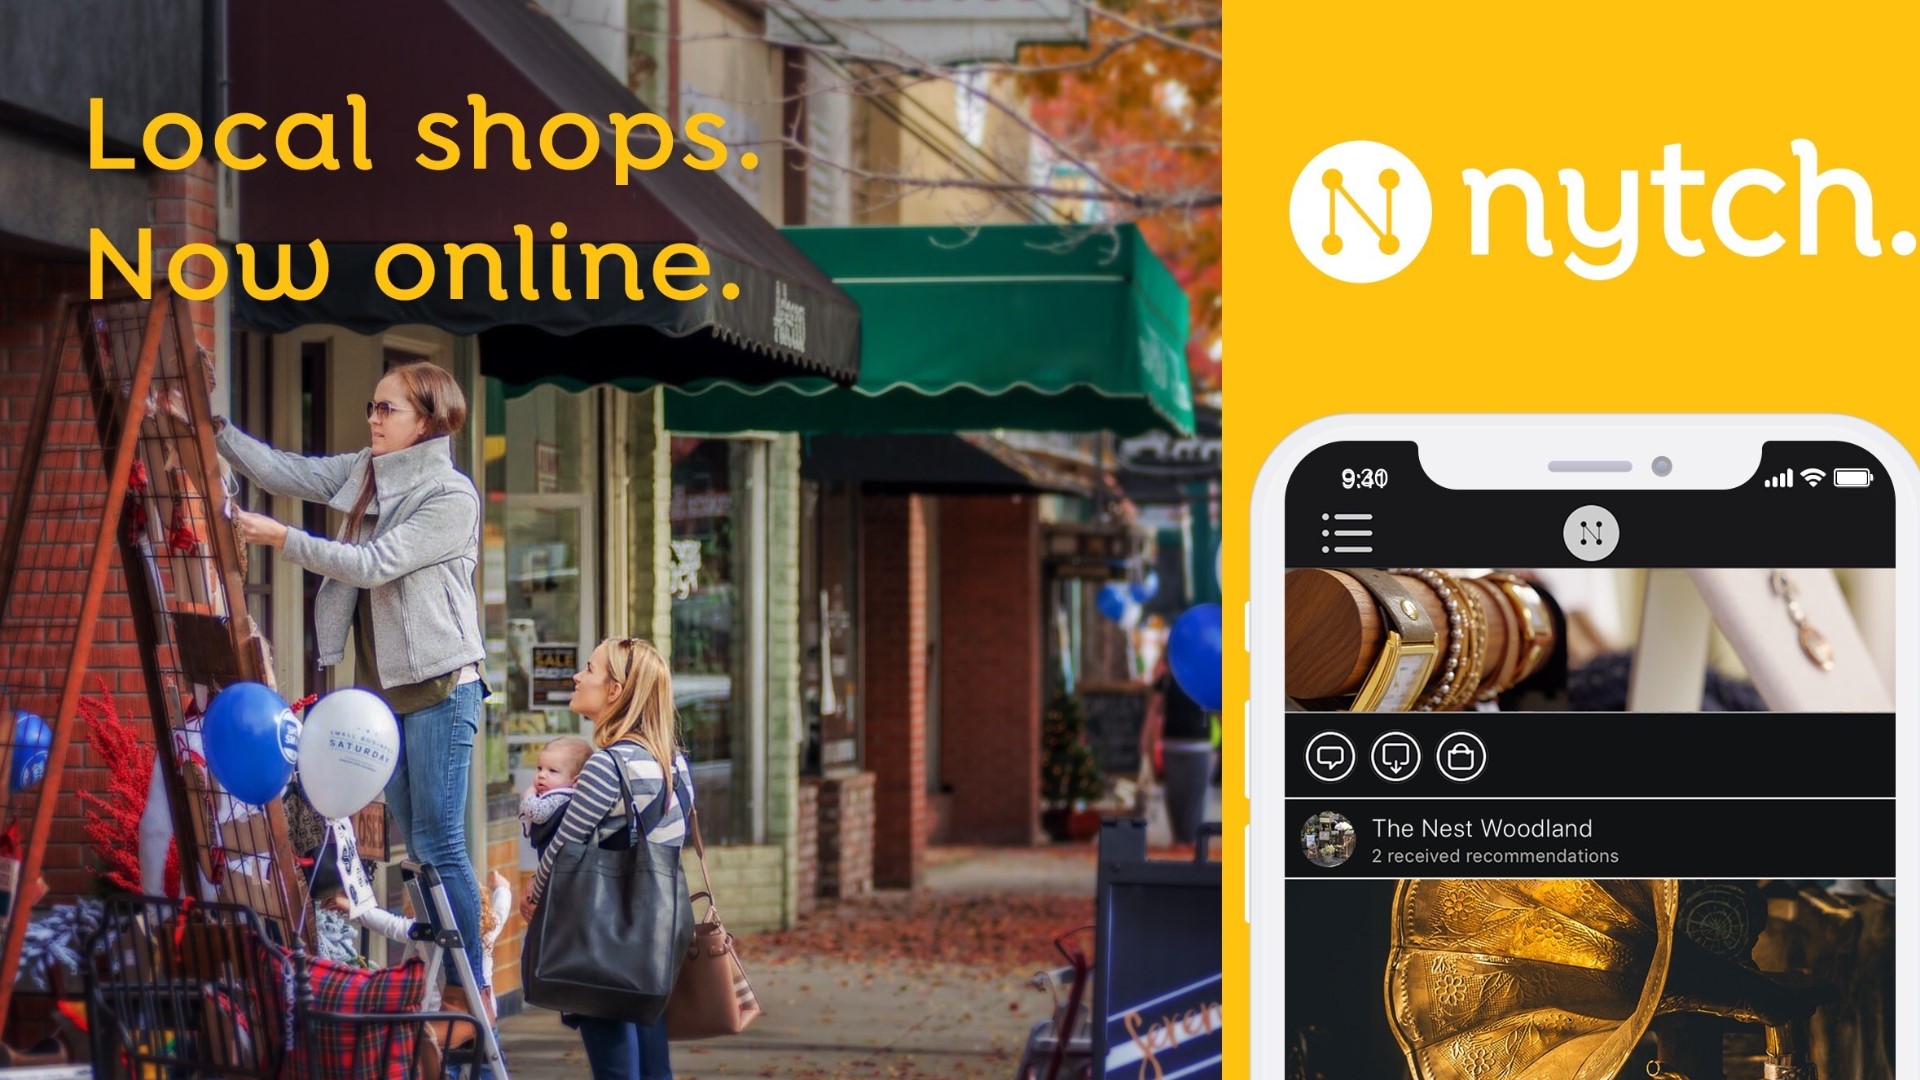 The Nytch app, available to download on iPhone and Android, aims to connect local independent businesses with nearby online shoppers during the coronavirus pandemic.